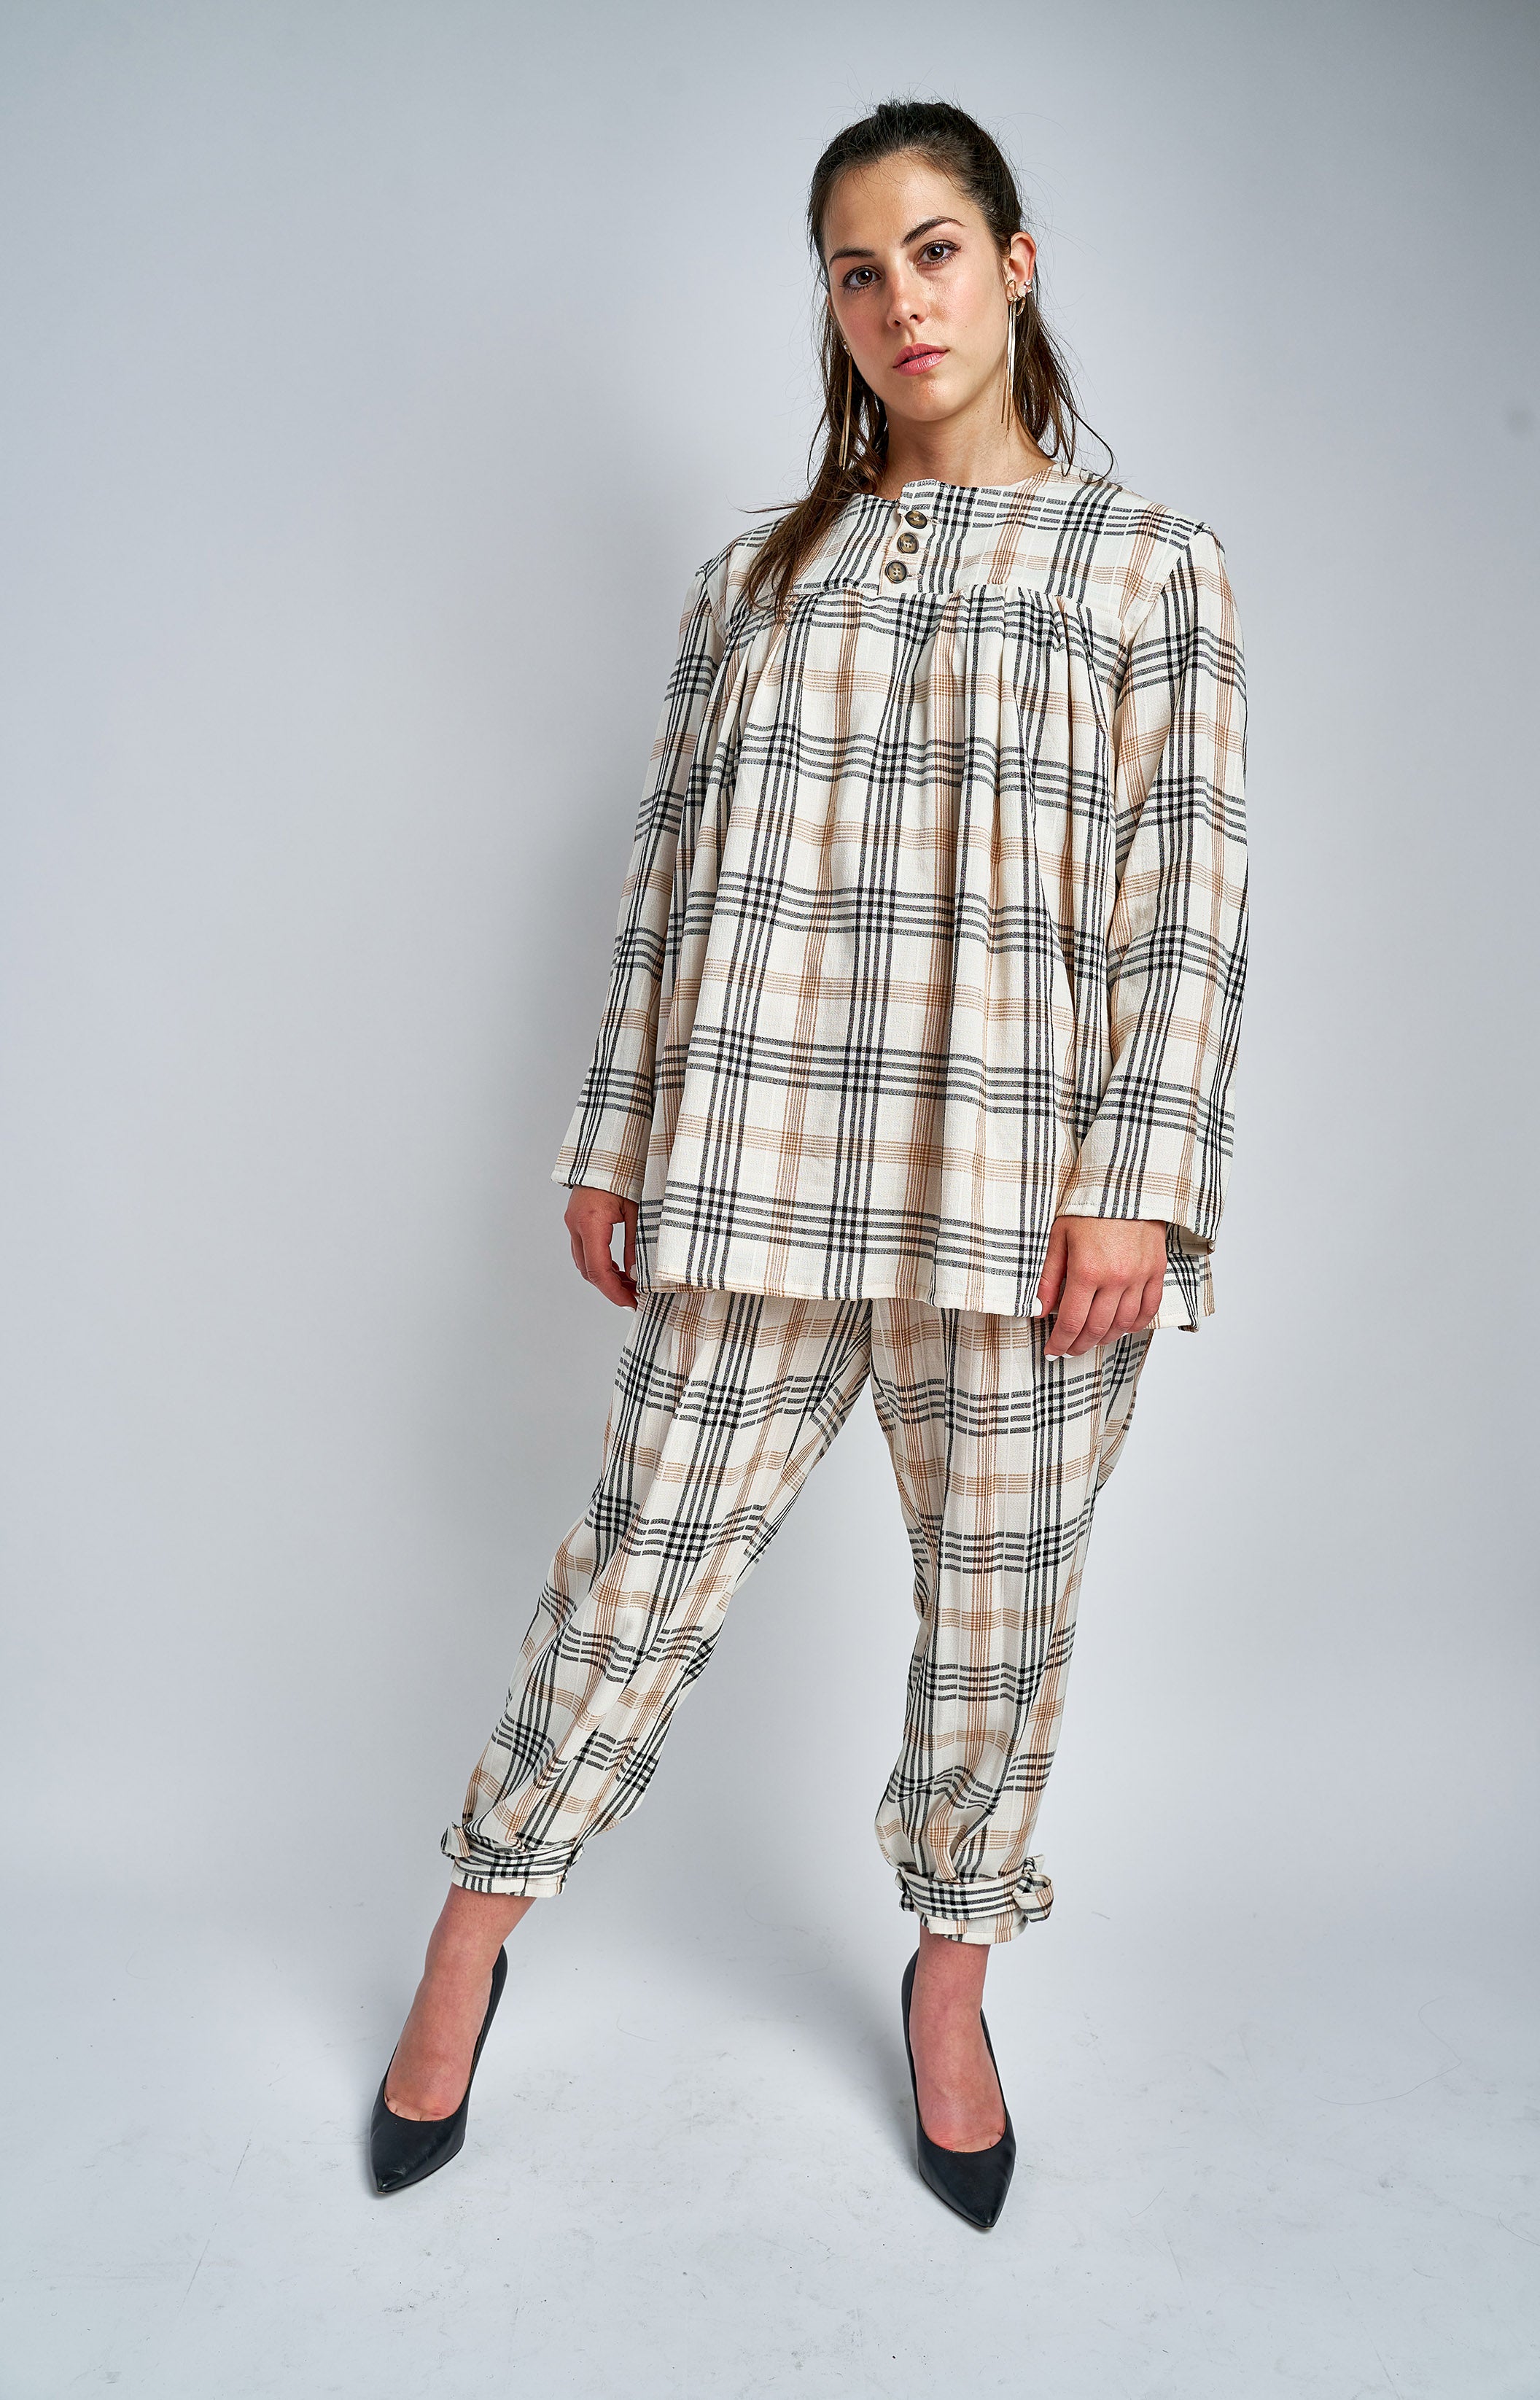 Women’s Tops | Relaxed fit pleated plaid top | Front view | Emily Westenberger)